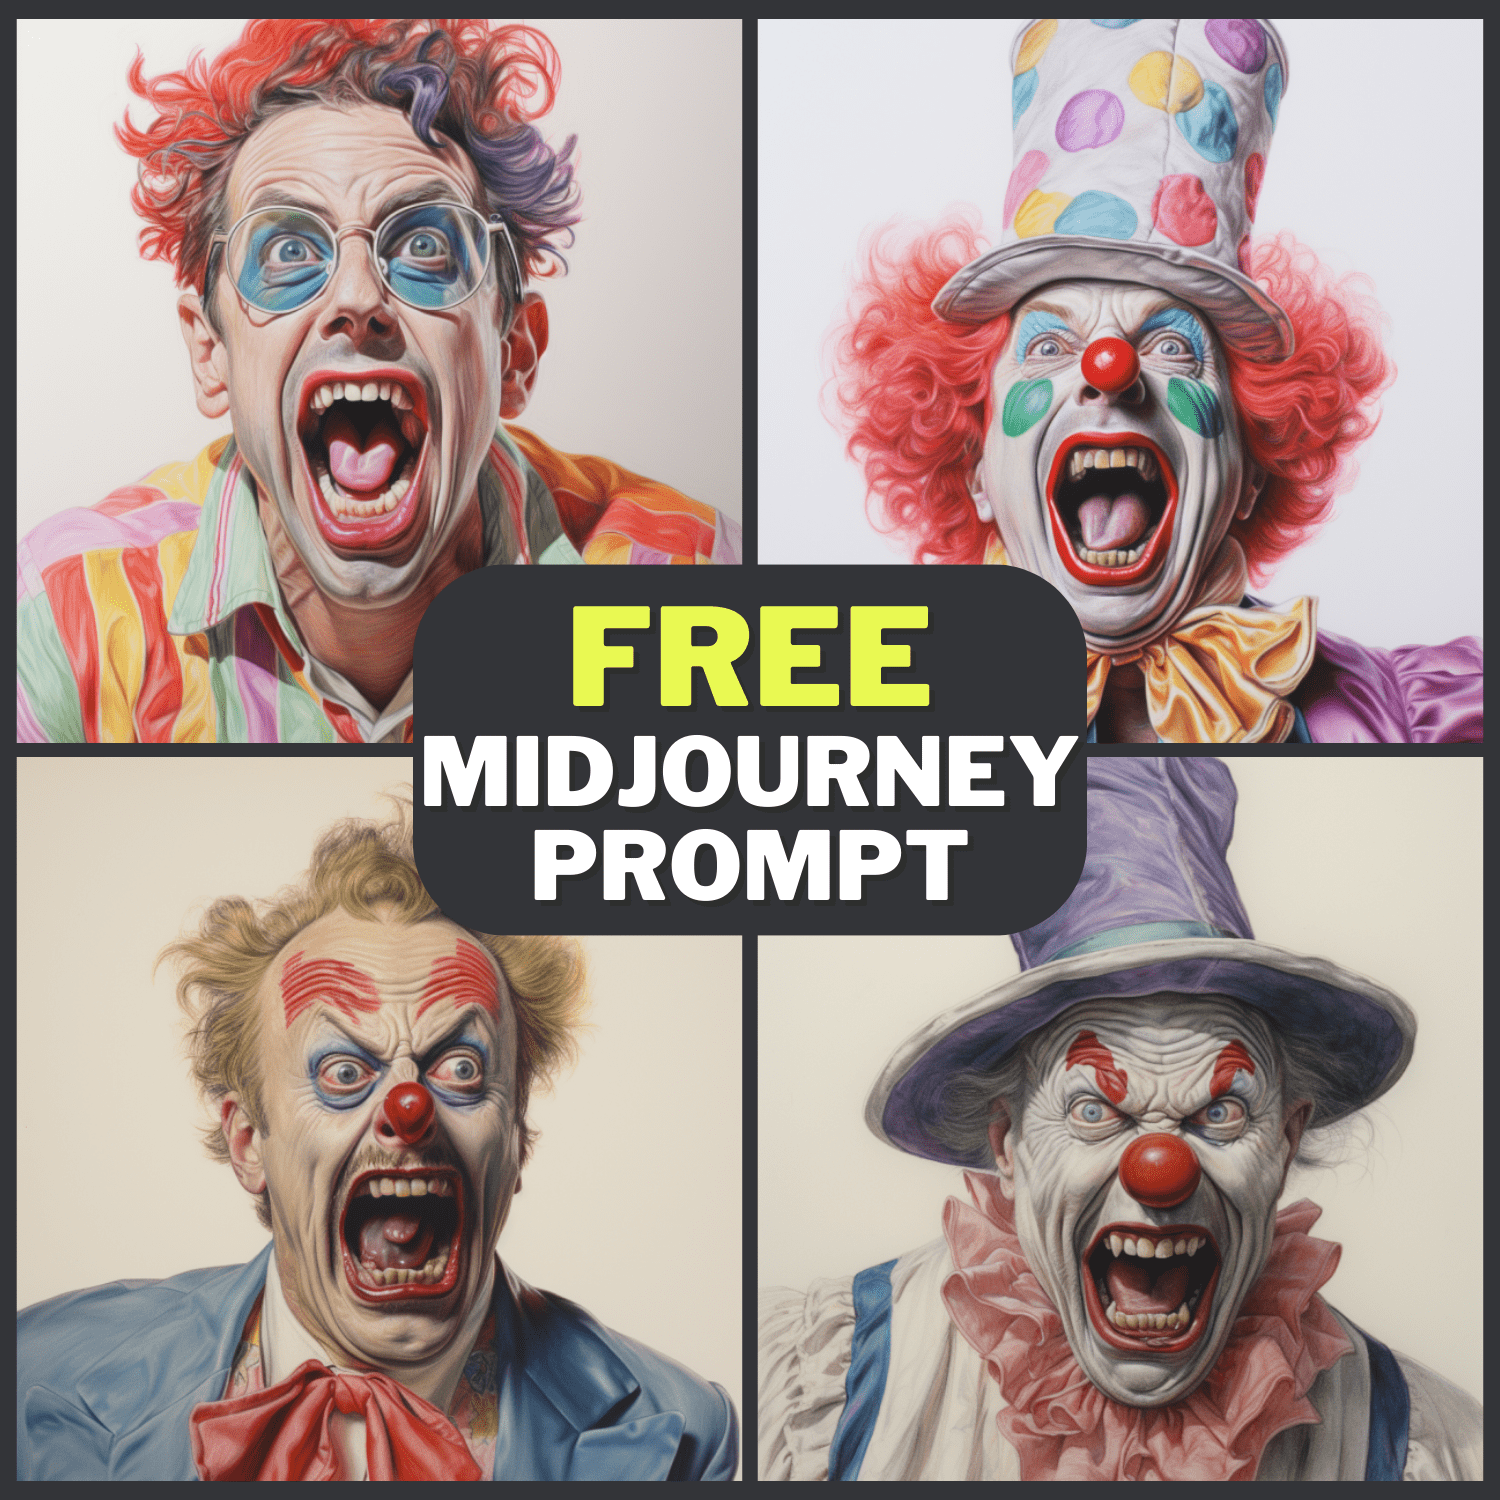 Shouting Man Portrait In Clown Outfit Free Midjourney Prompt 1